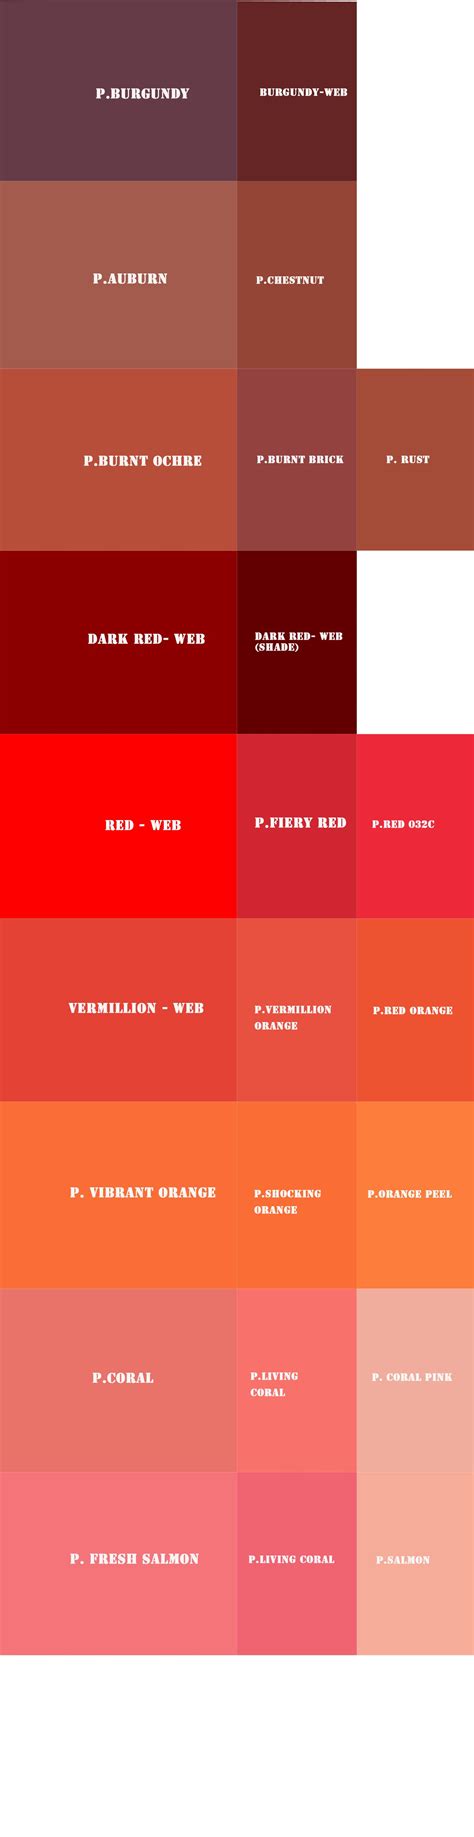 My Red Pantone And Web Color References By The Way The Pantone Colors